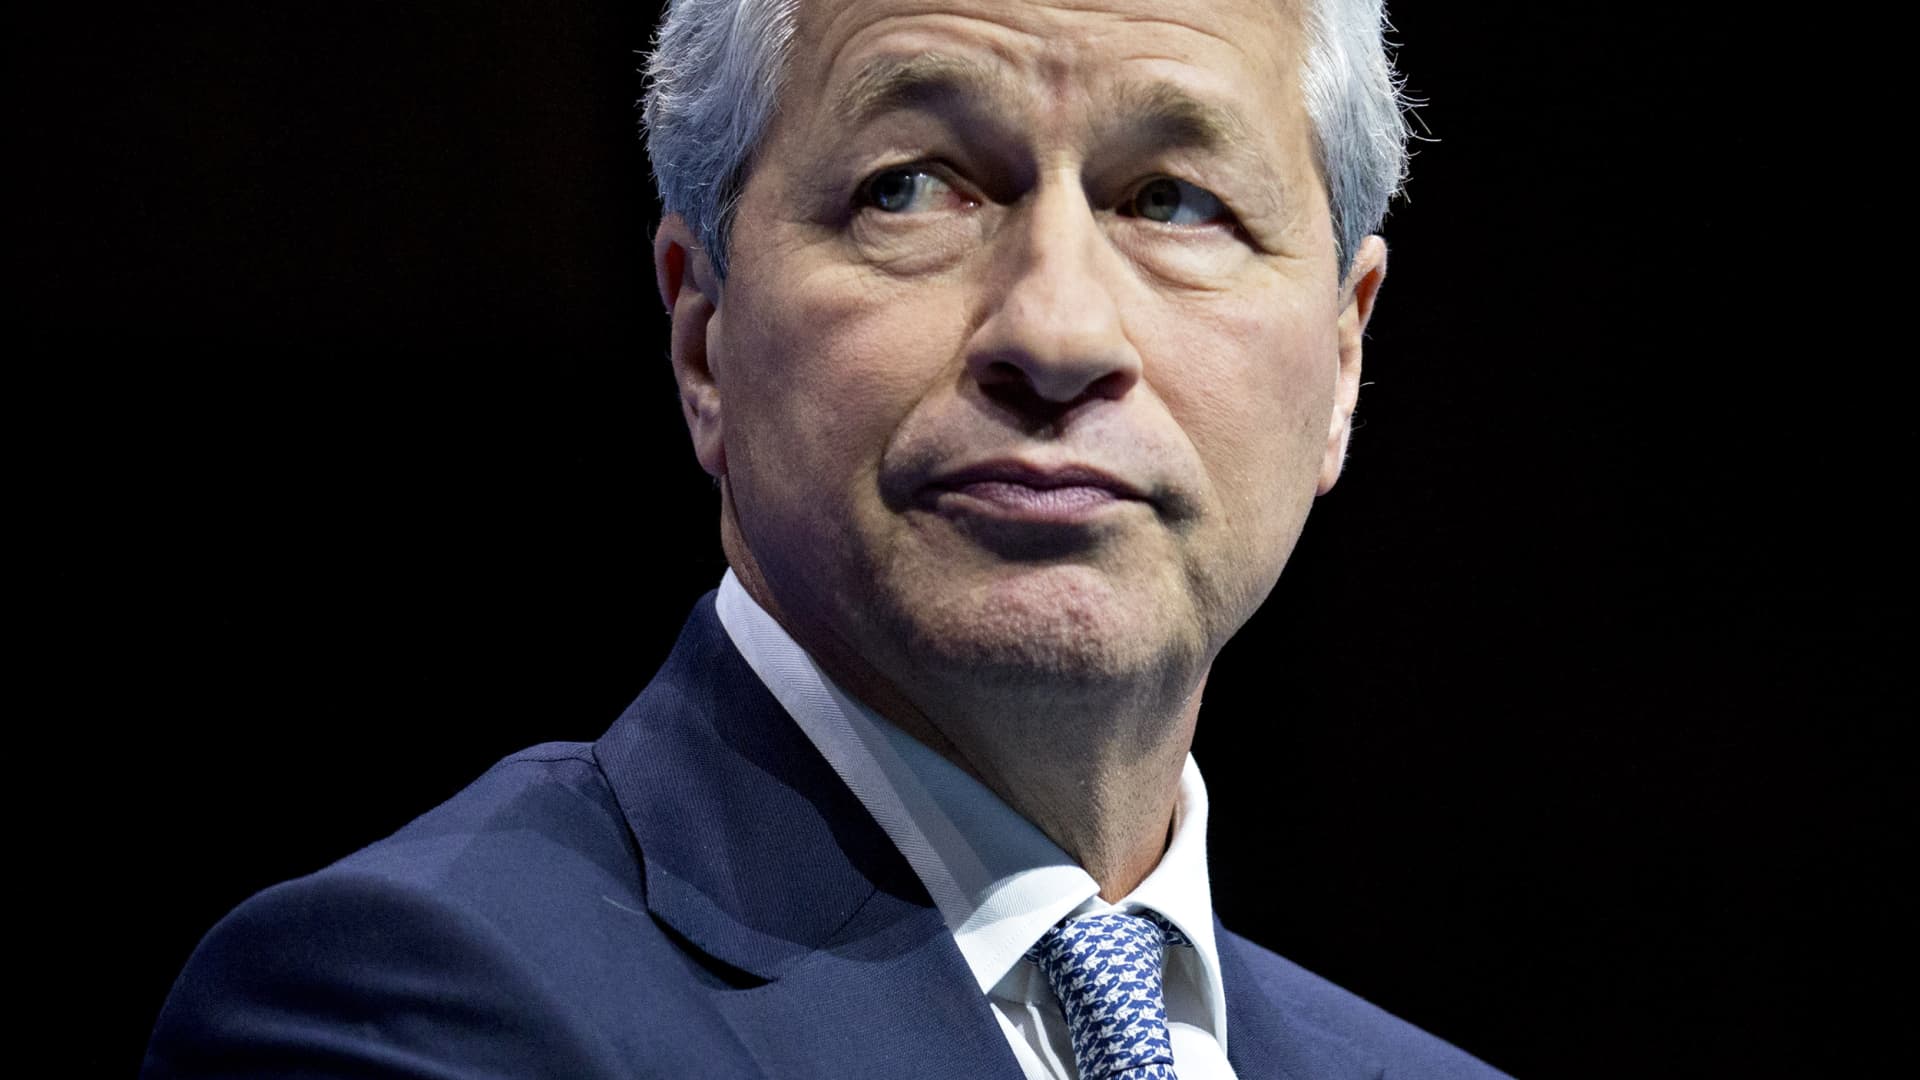 JPMorgan CEO Jamie Dimon sees ‘storm clouds’ ahead for US economy